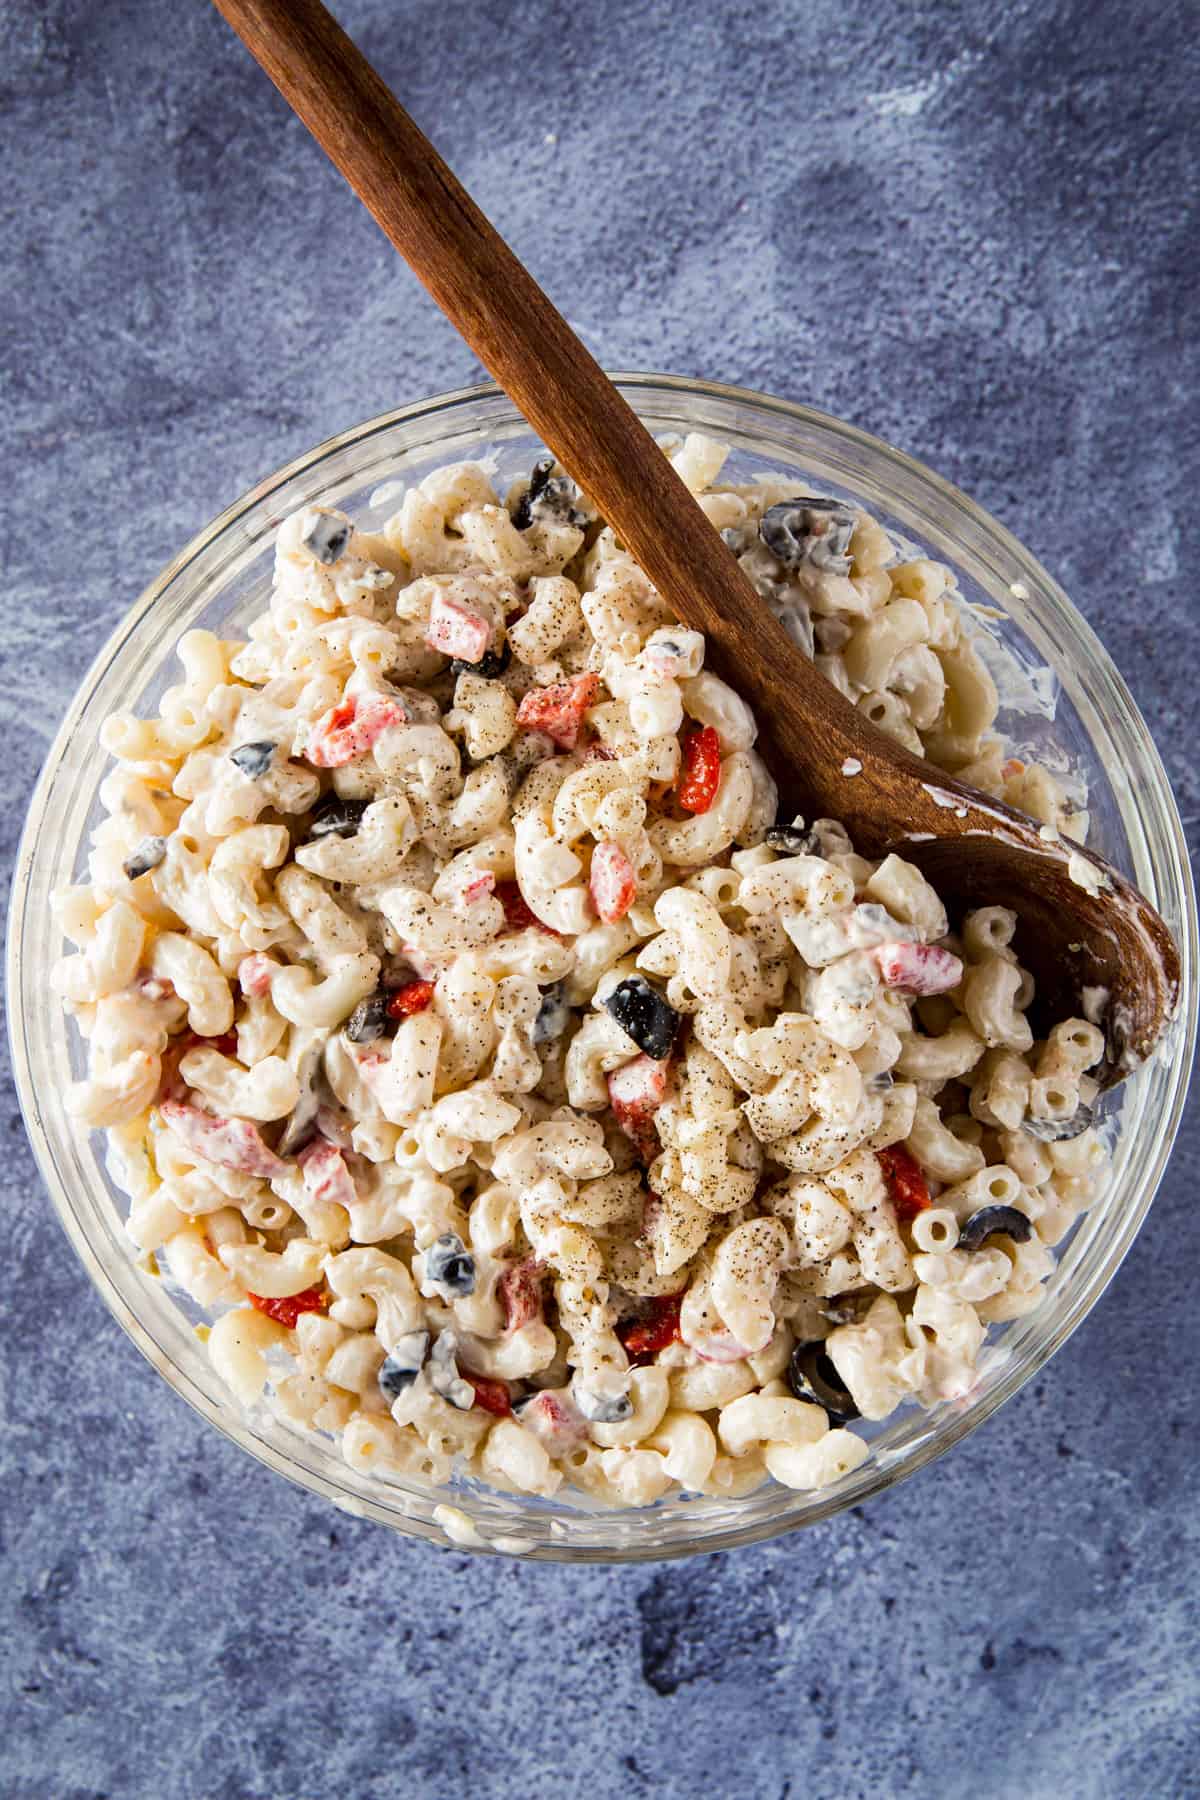 Bowl of macaroni salad with wooden spoon.